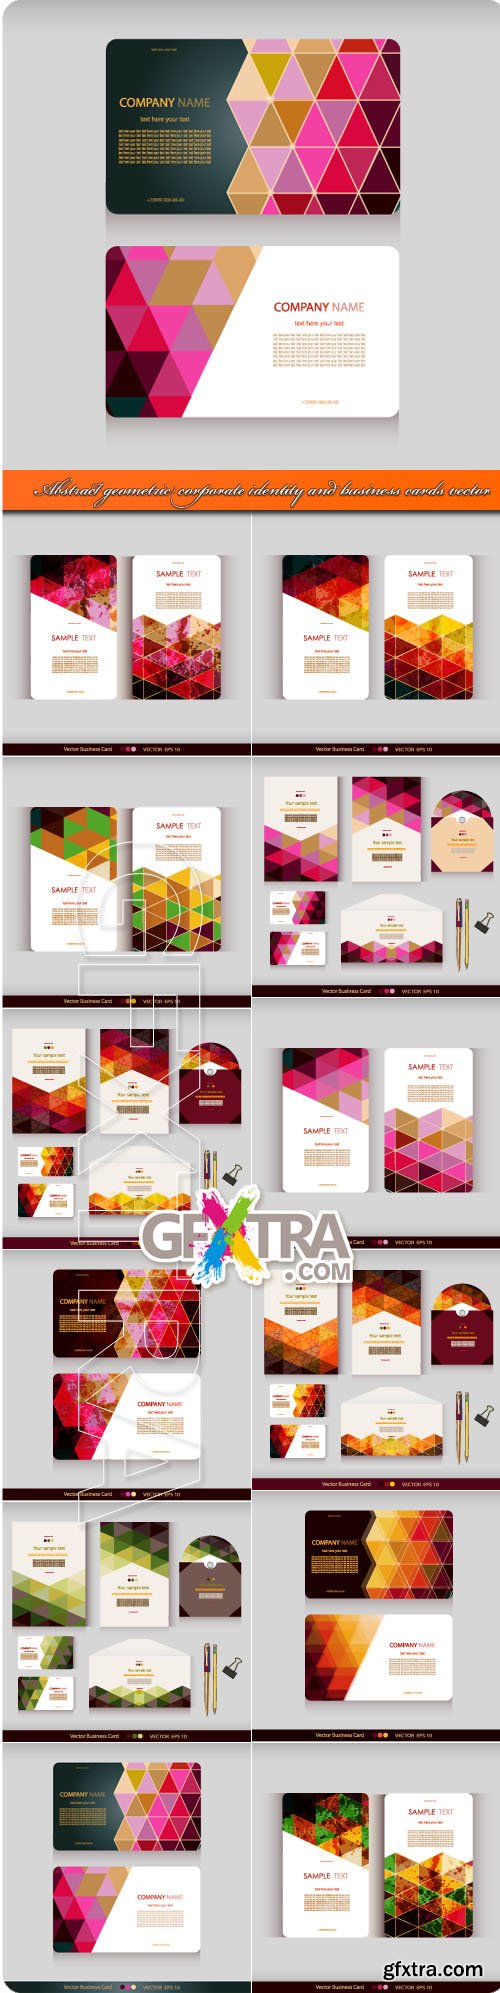 Abstract geometric corporate identity and business cards vector